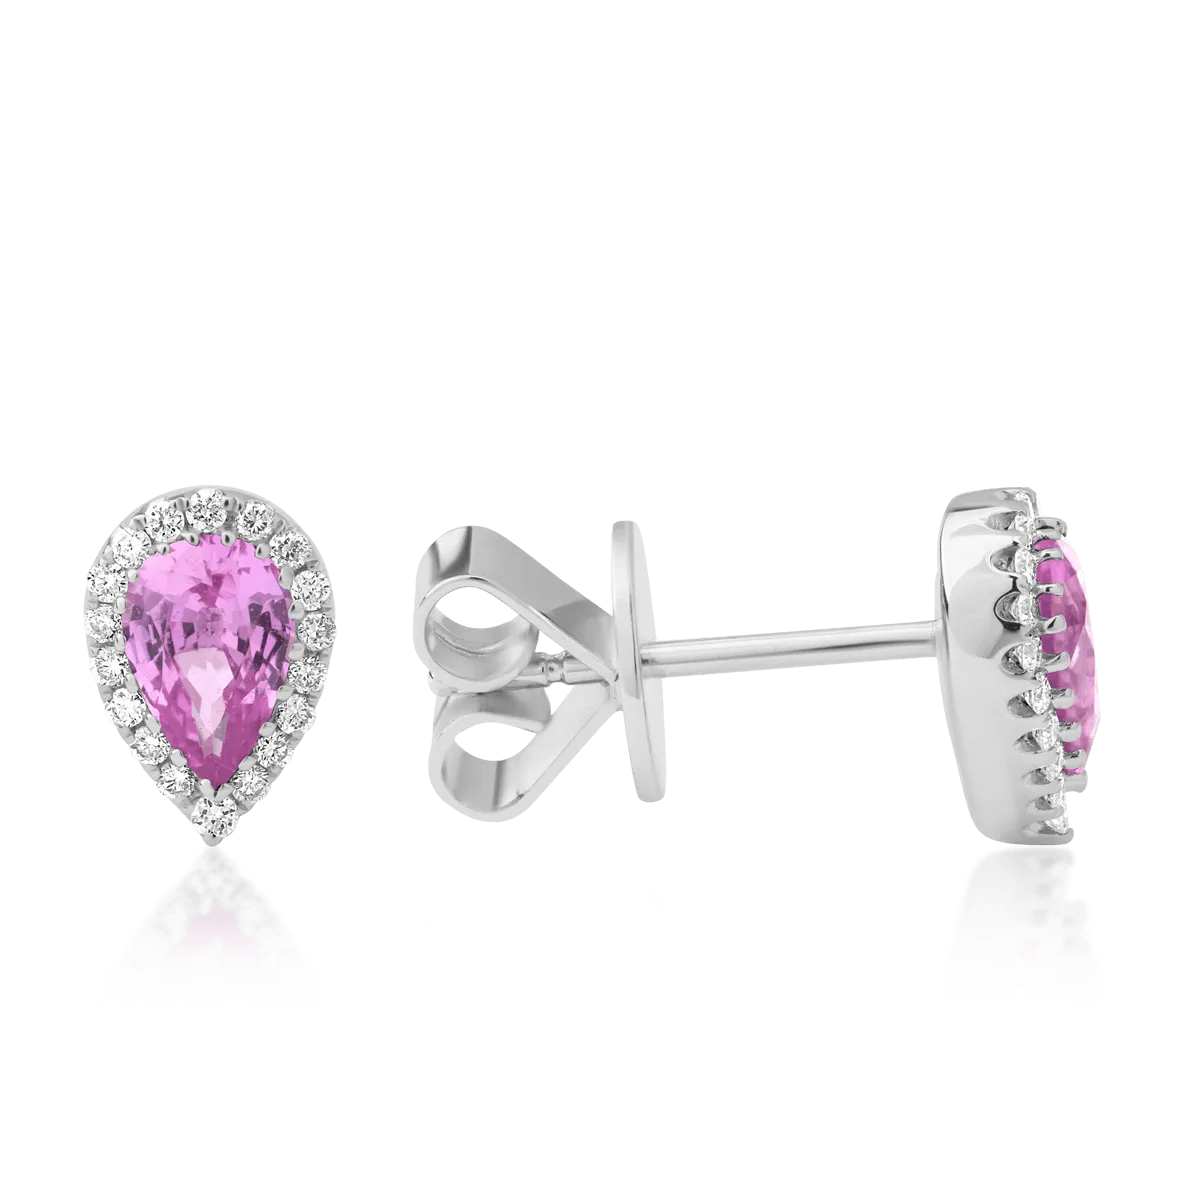 18K white gold earrings with 0.96ct pink sapphires and 0.13ct diamonds